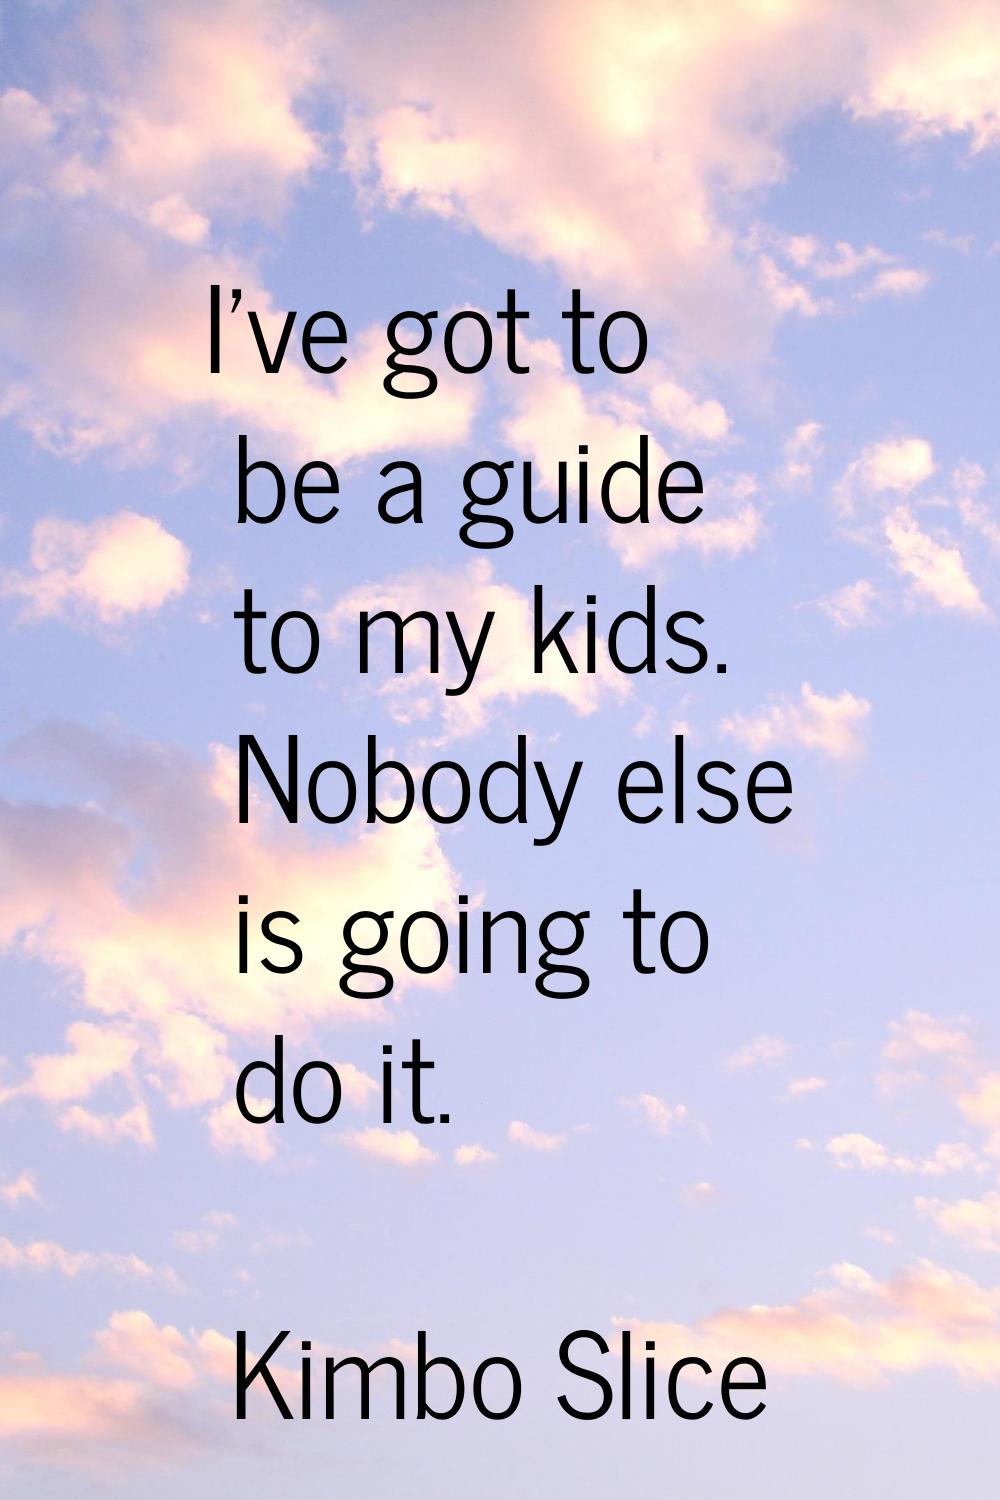 I've got to be a guide to my kids. Nobody else is going to do it.